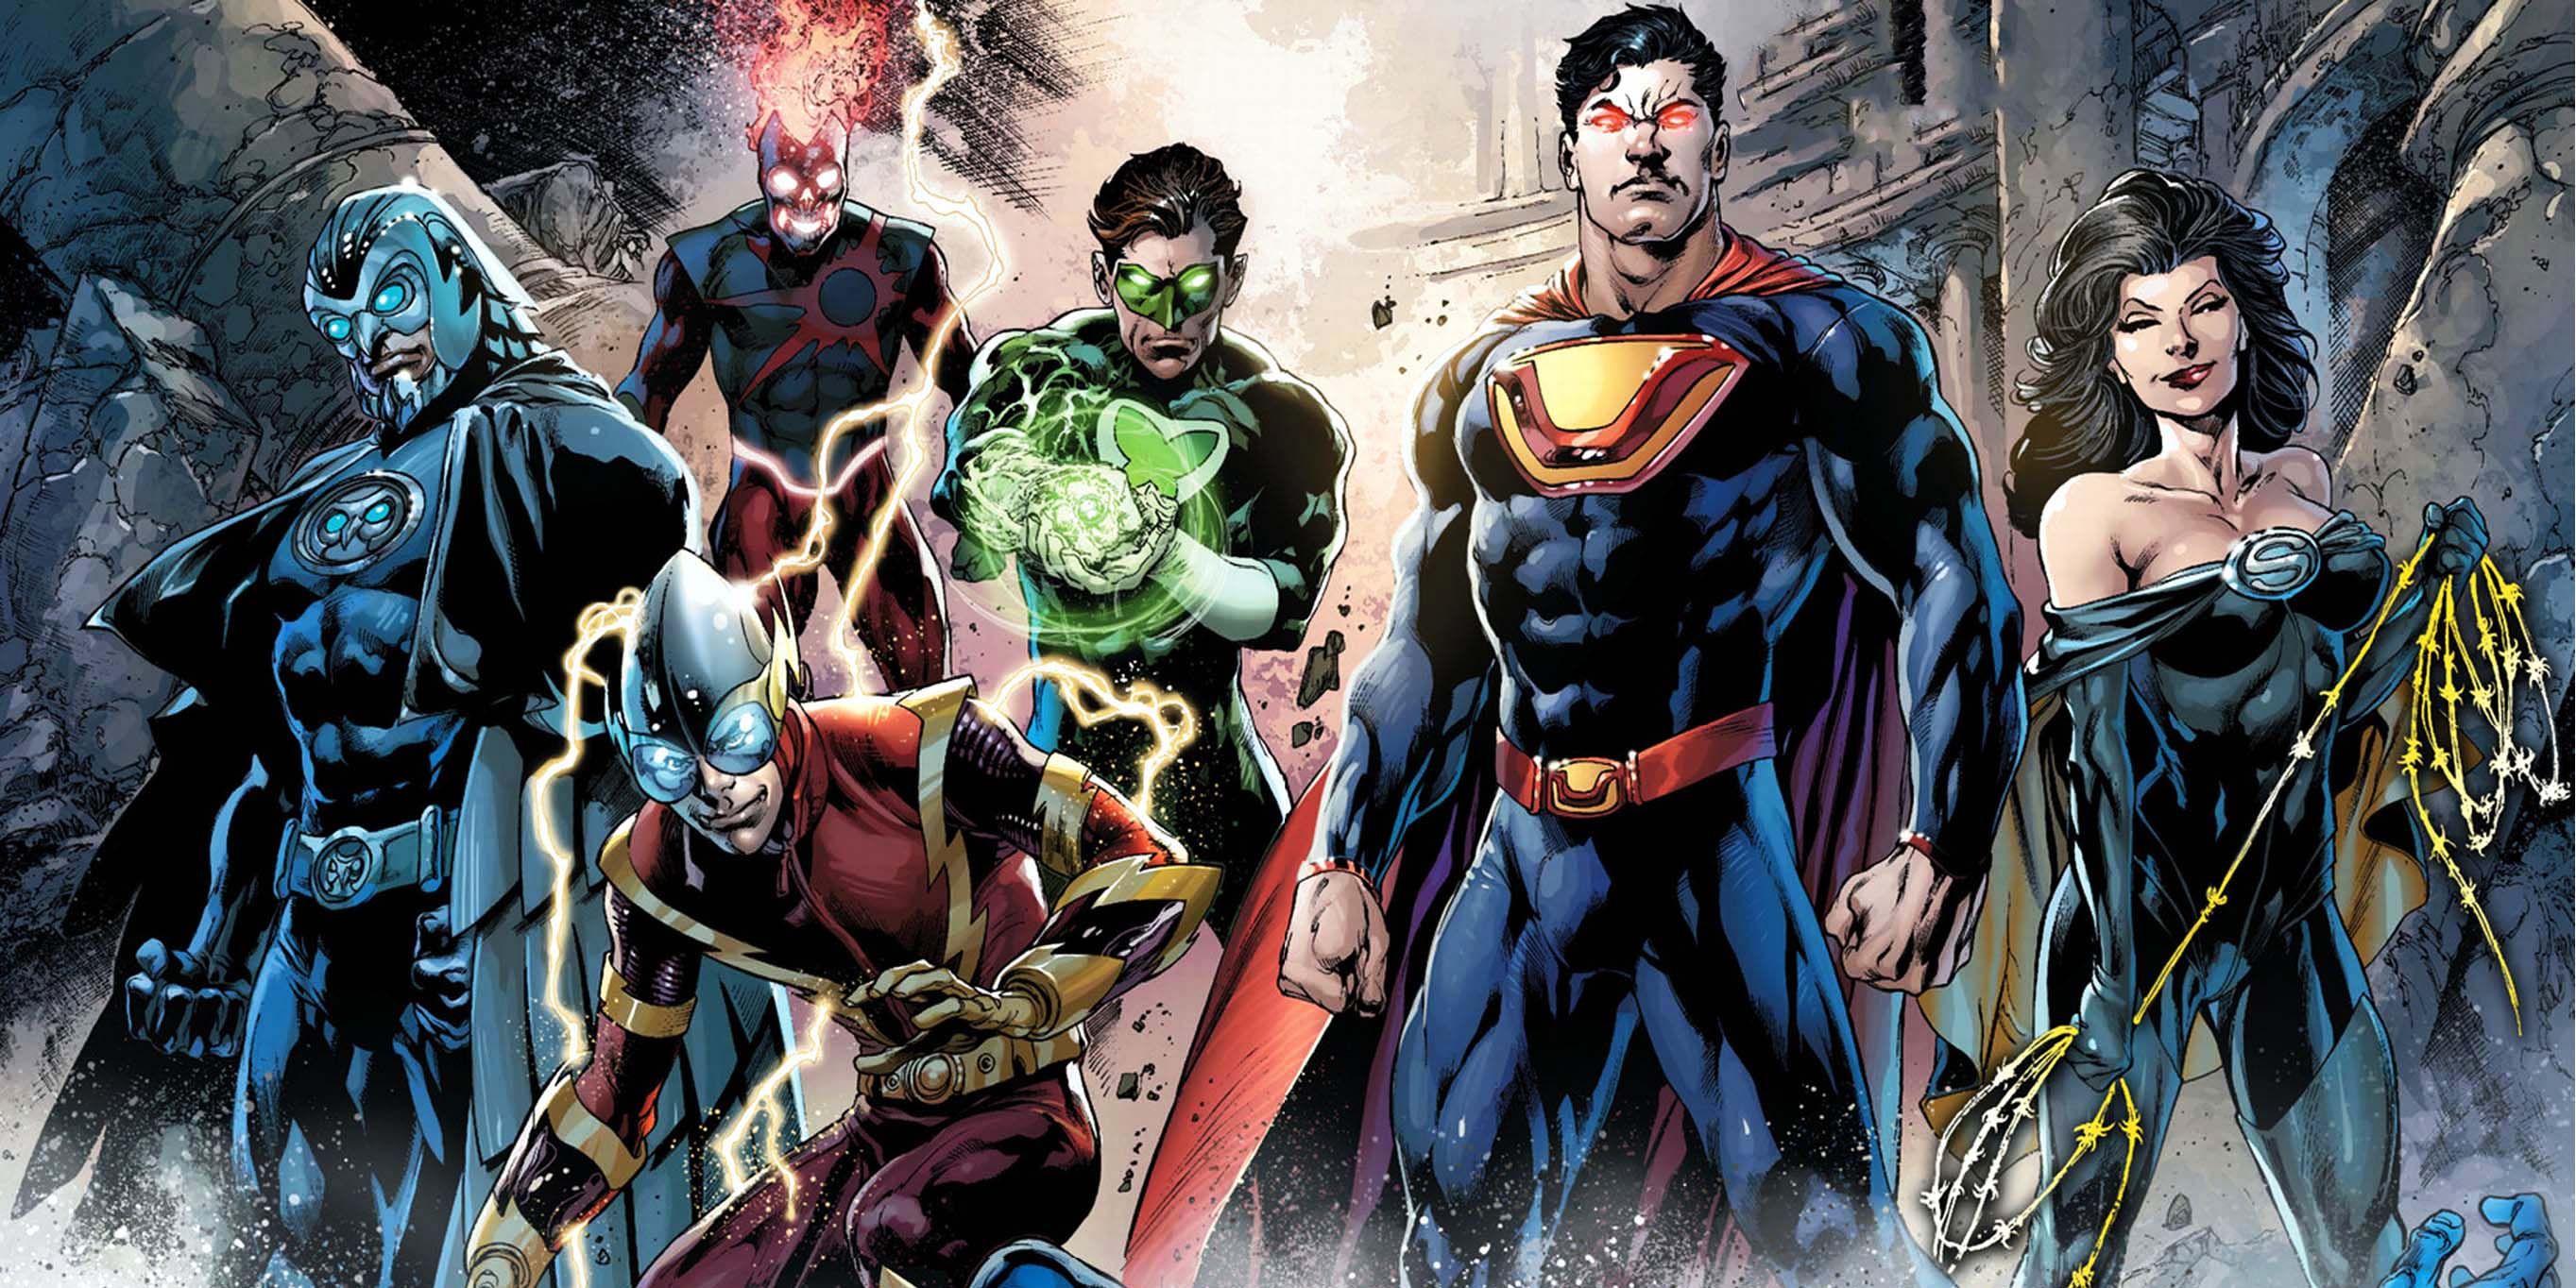 The Crime Syndicate Of America from DC Comics